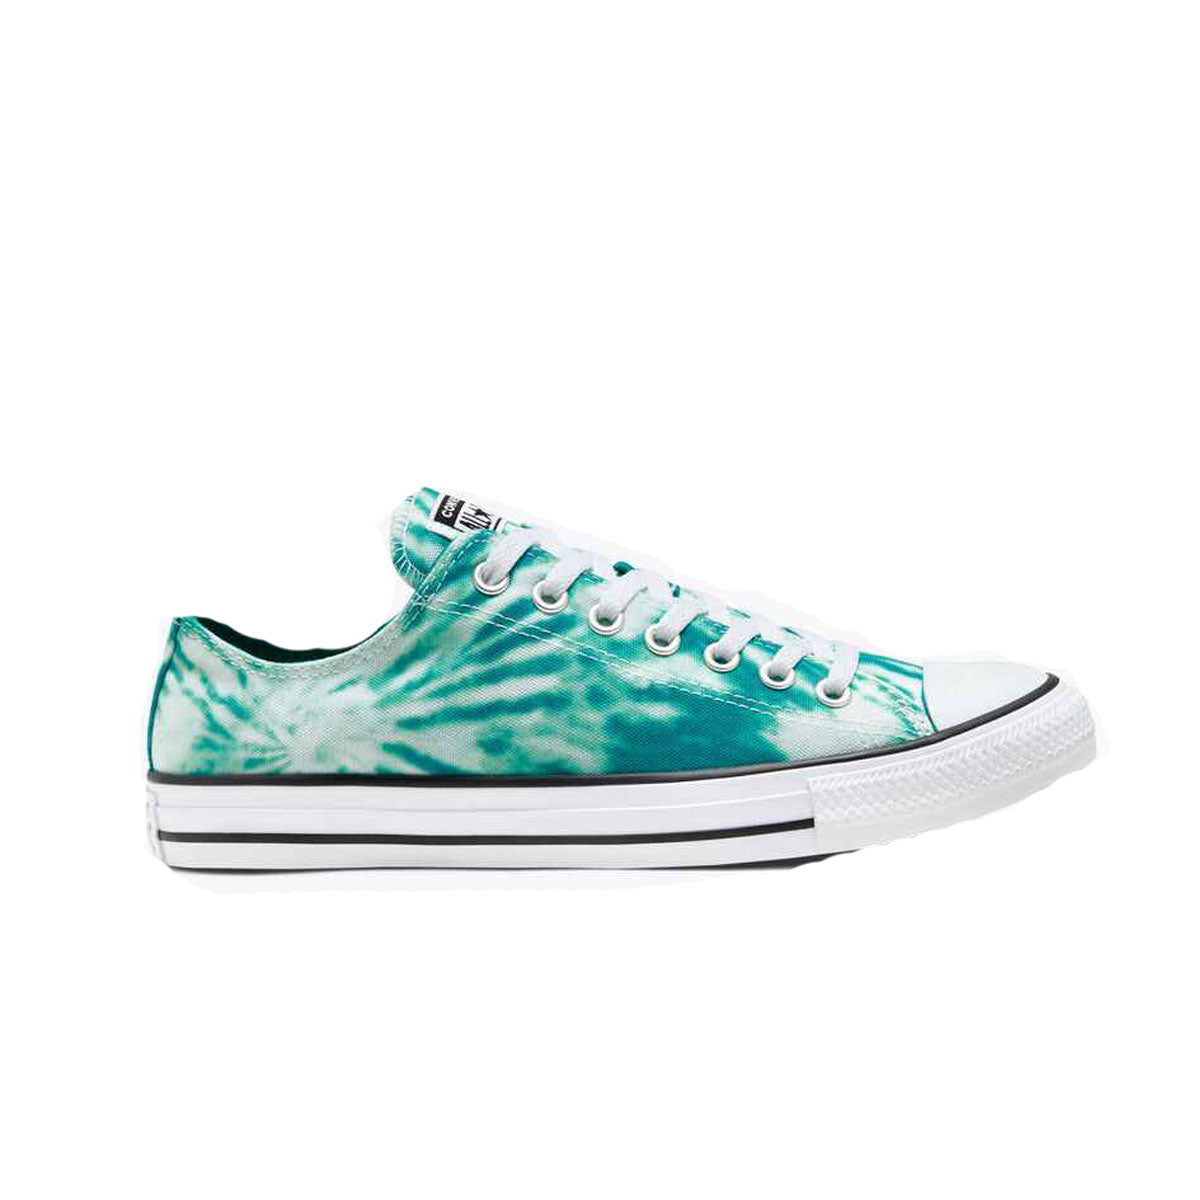 CONVERSE CHUCK TAYLOR ALL STAR TIE DYE TWISTED VACATION OX LOW UNISEX SNEAKERS 167930F